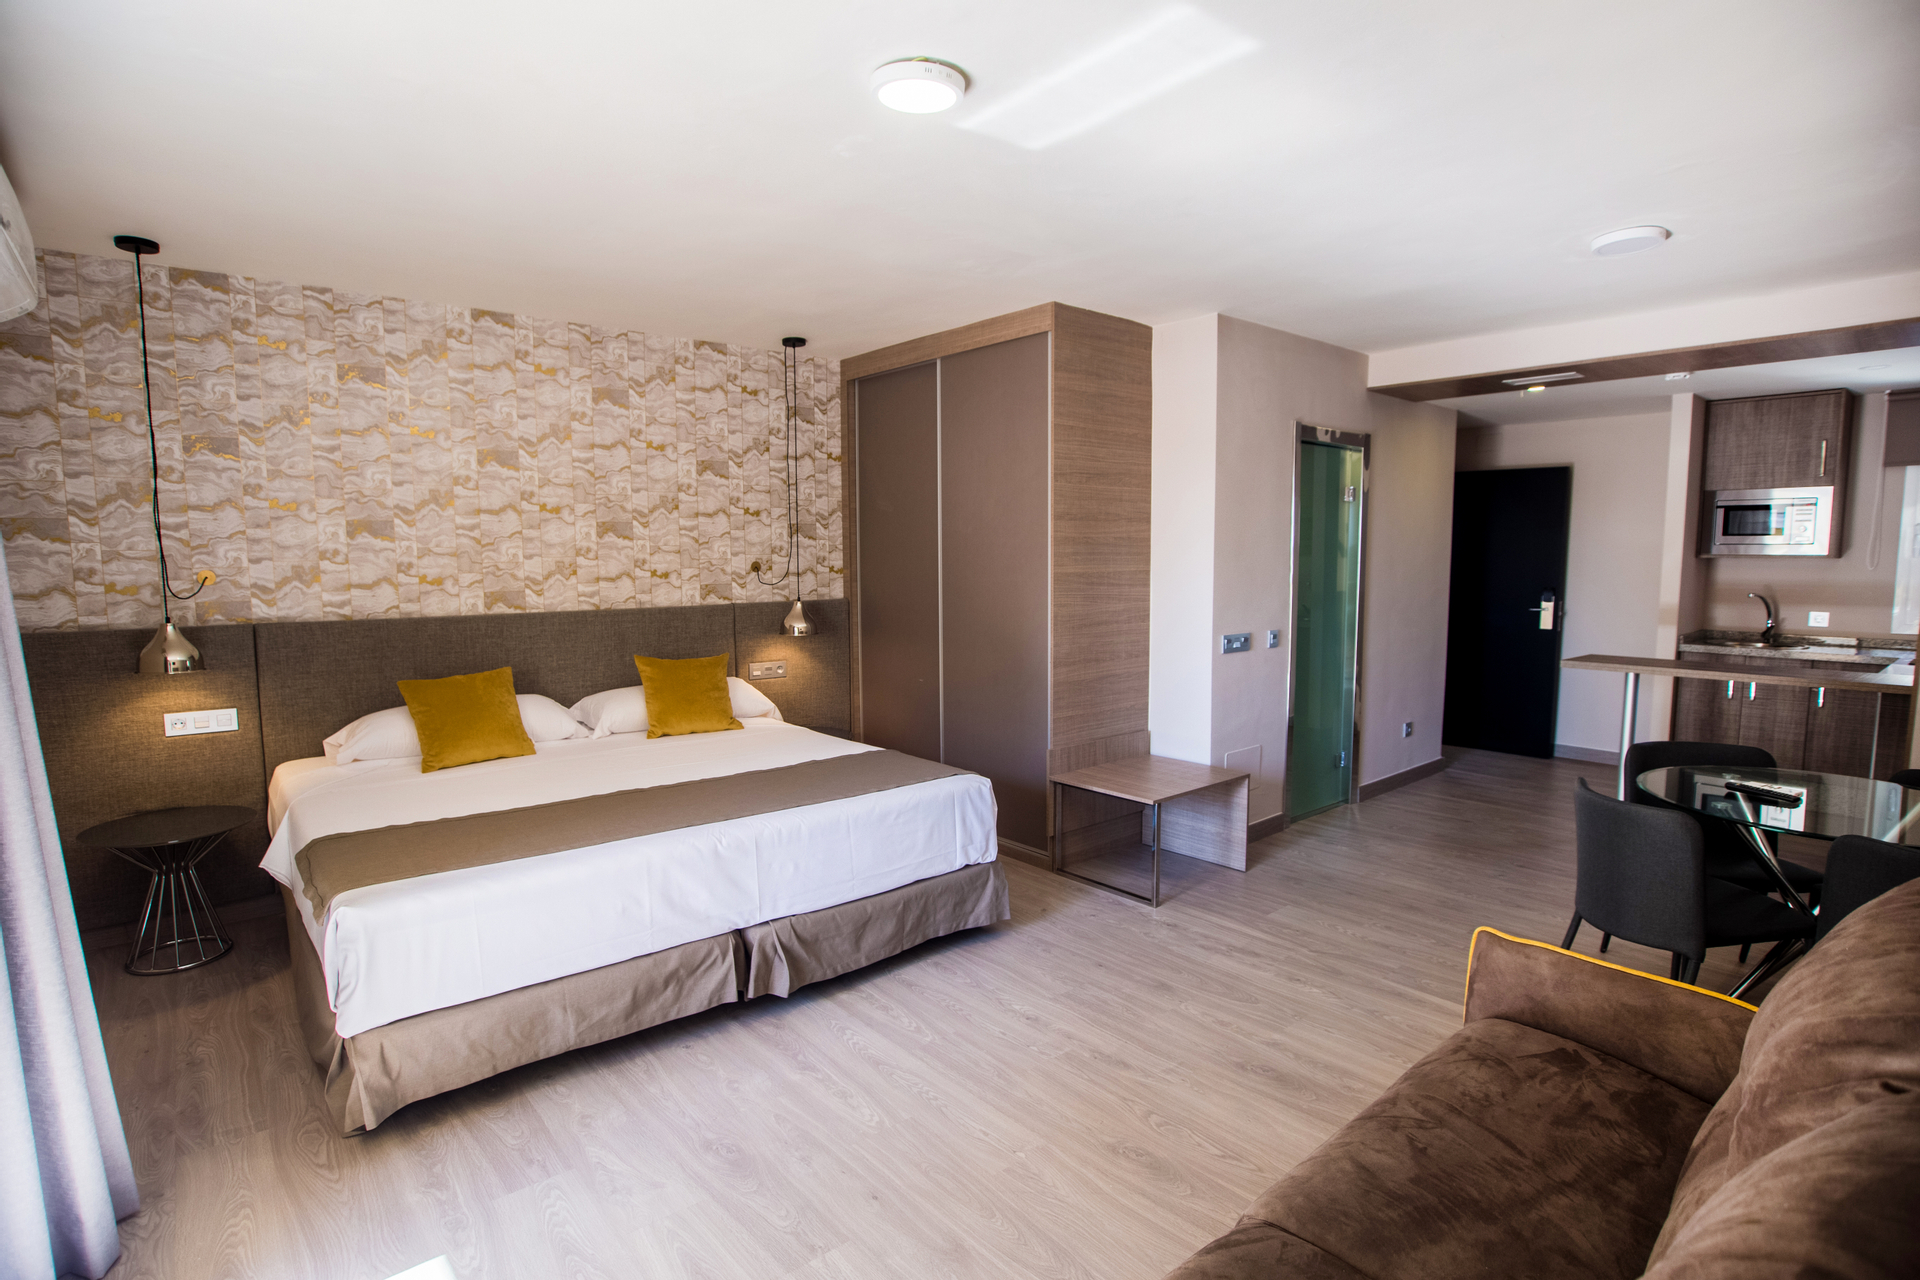 Aparthotel with Single Bed